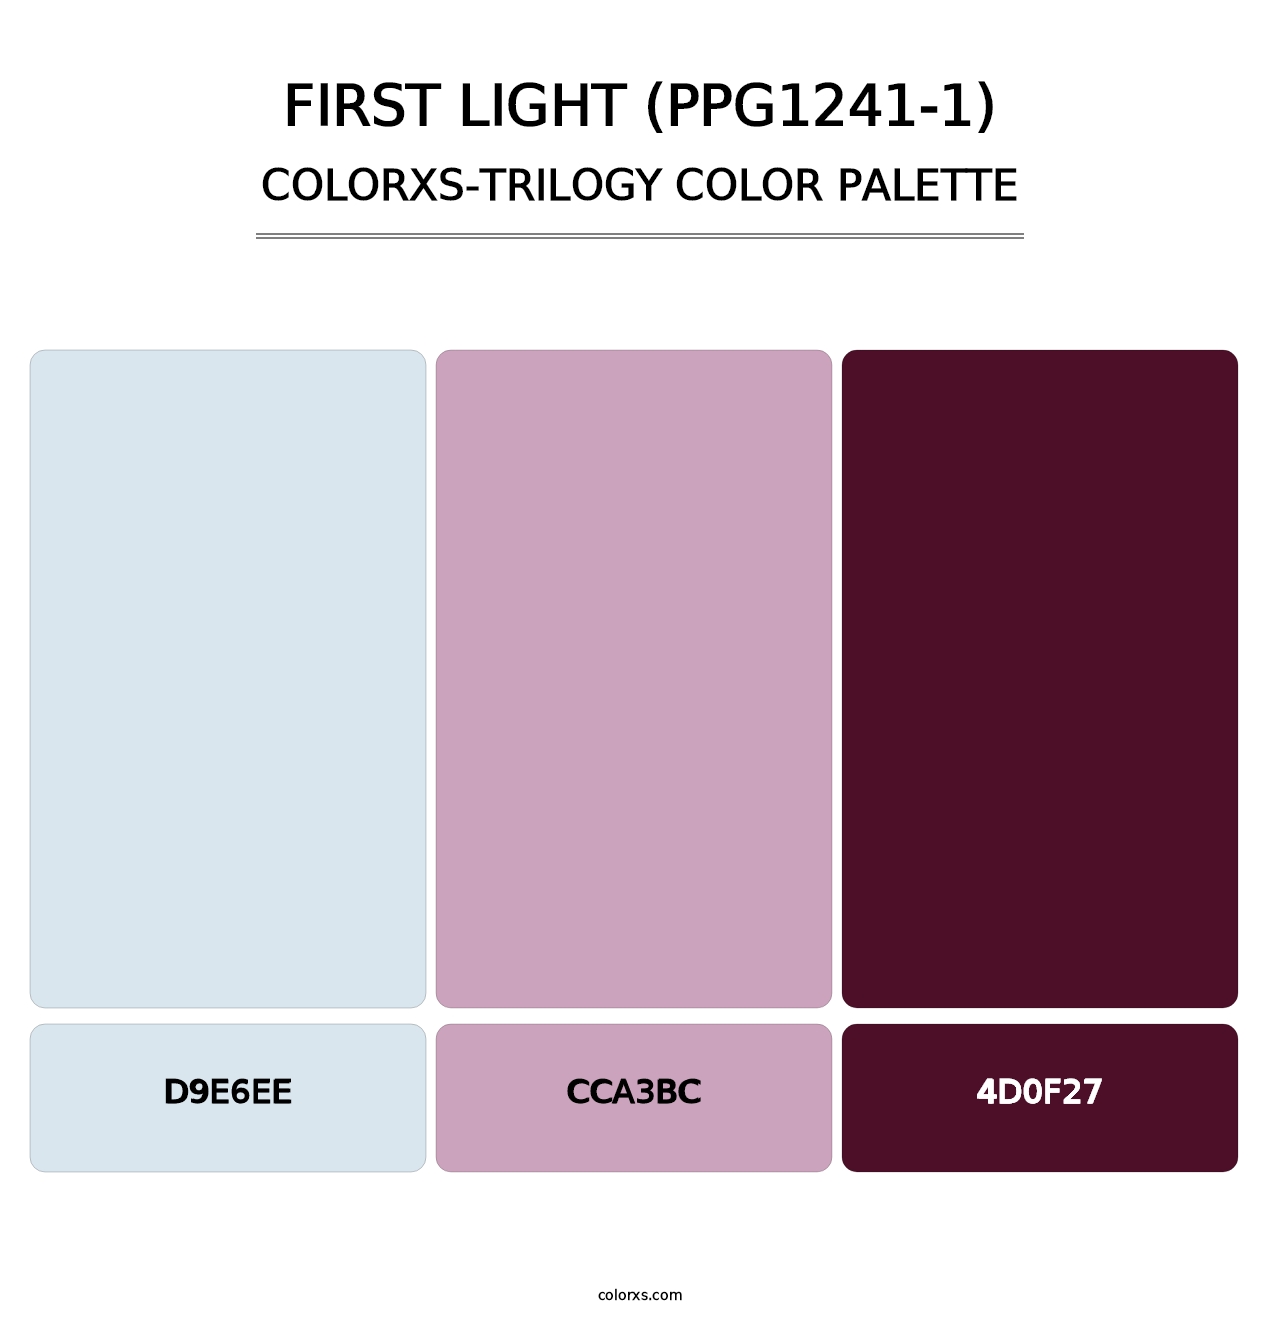 First Light (PPG1241-1) - Colorxs Trilogy Palette